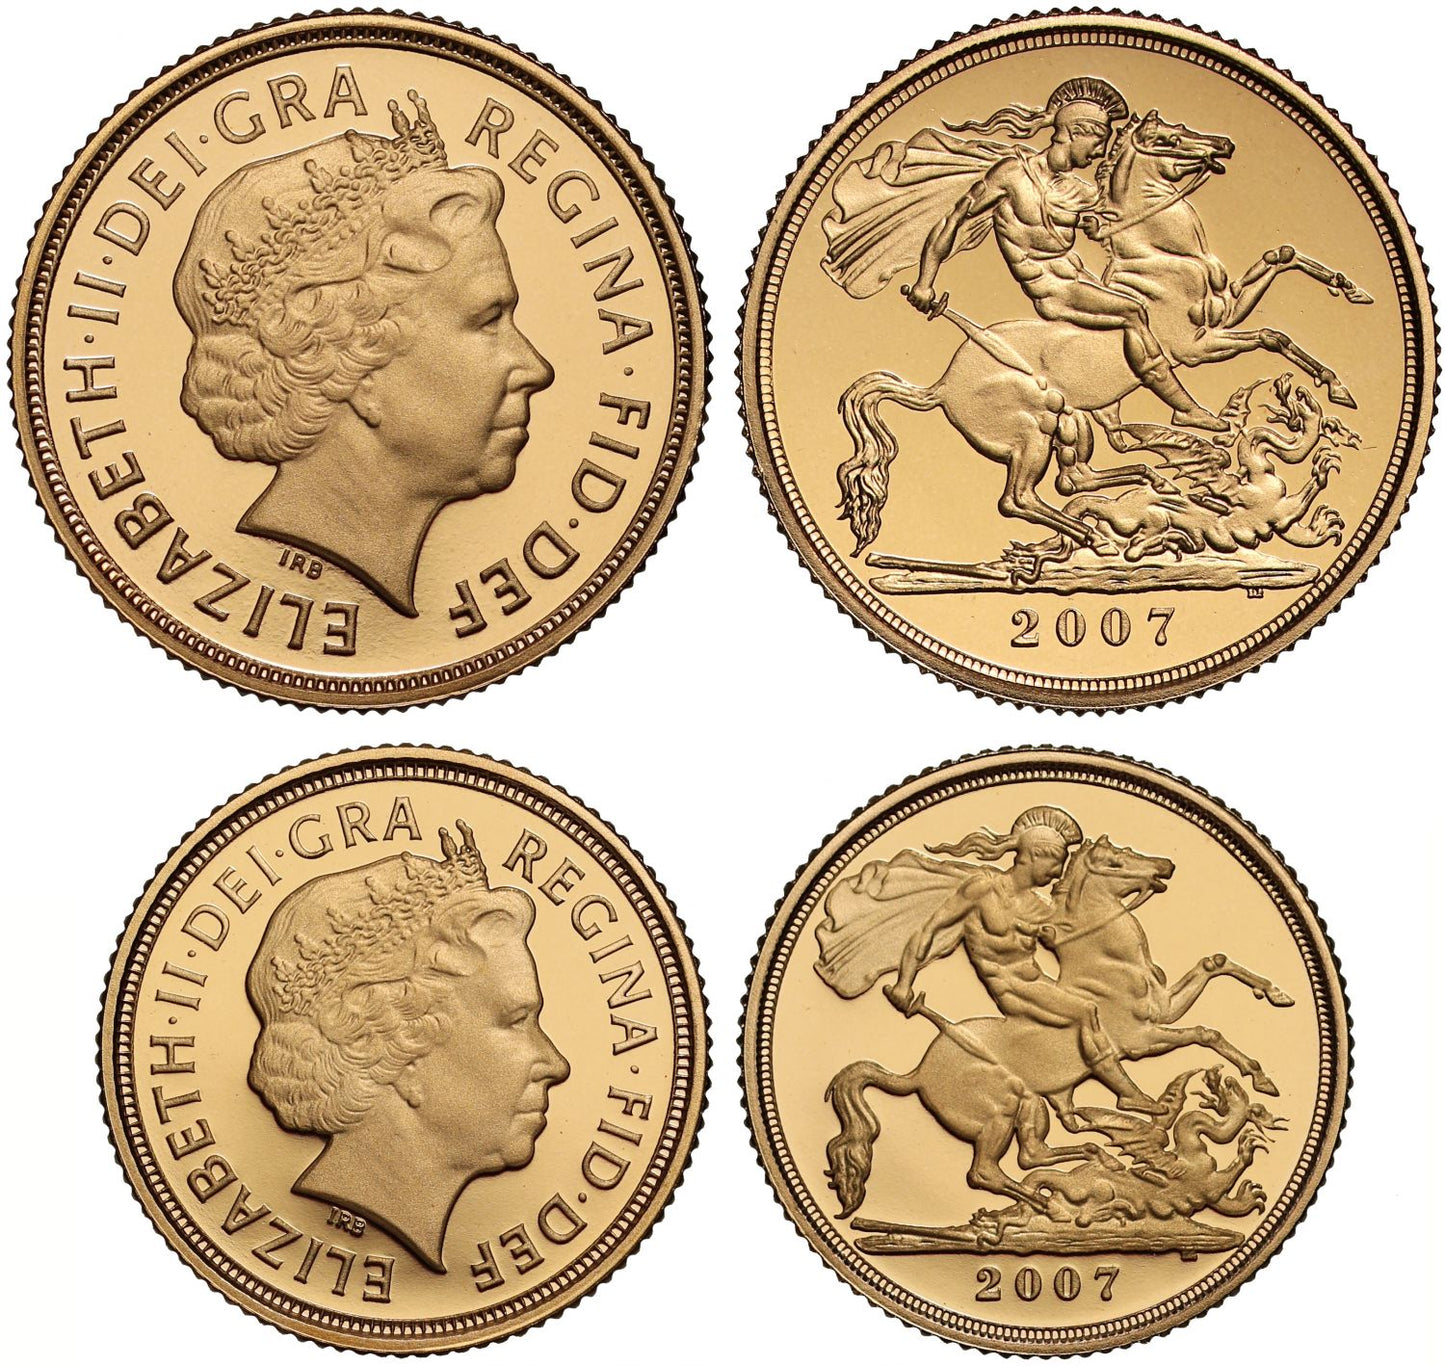 Elizabeth II 2007 2-coin proof Set Sovereign and Half-Sovereign